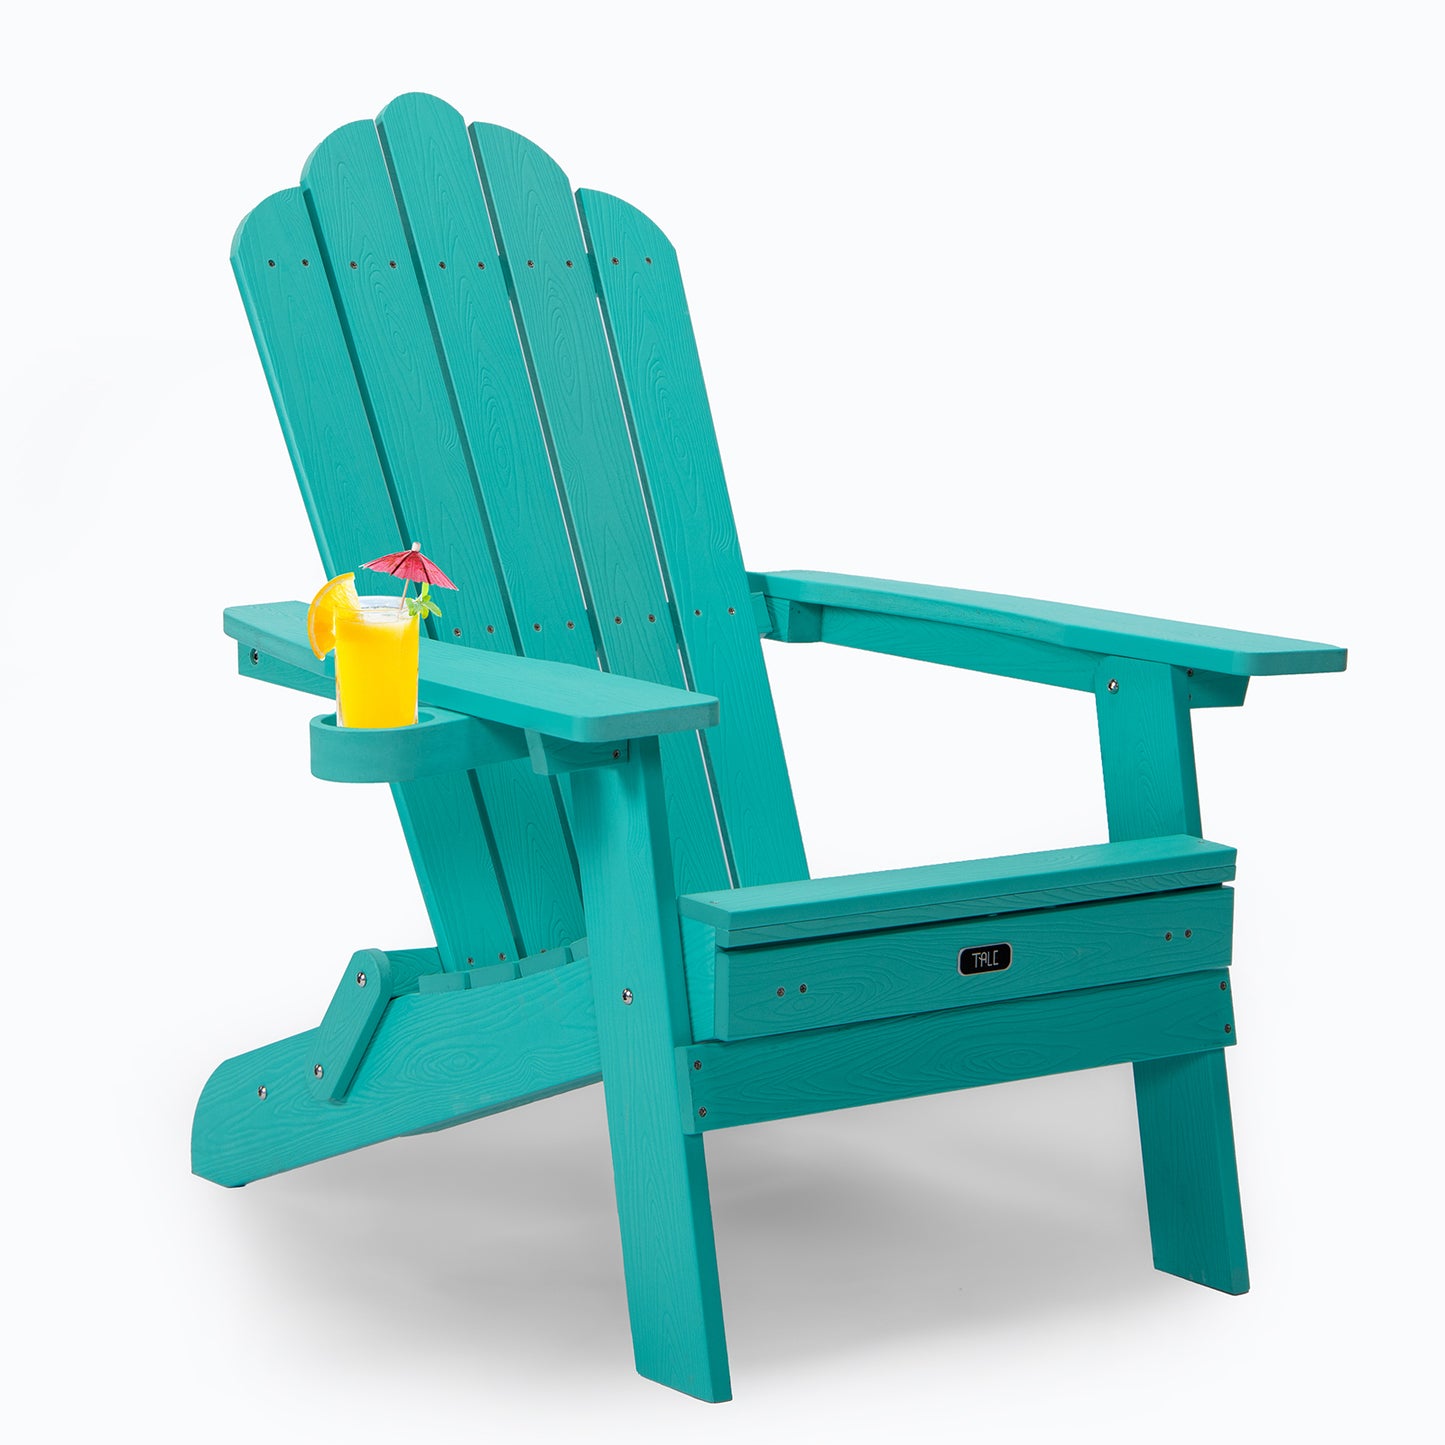 TALE Folding Adirondack Chair with Pullout Ottoman with Cup Holder, Oversized, Poly Lumber,  for Patio Deck Garden, Backyard Furniture, Easy to Install,GREEN. Ban on Amazon